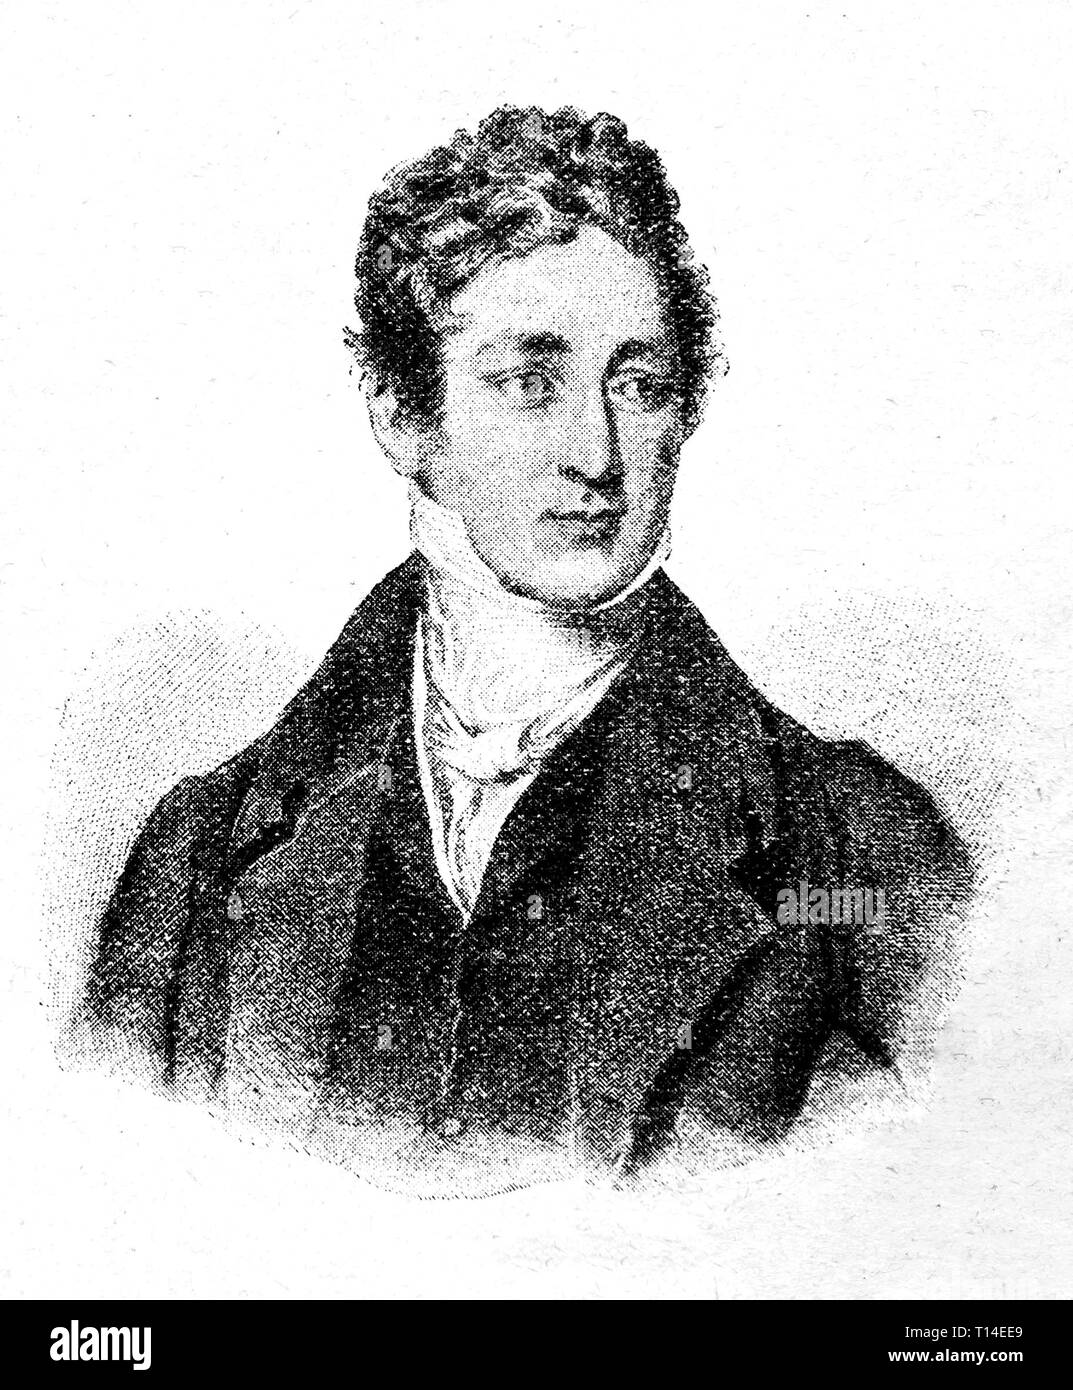 Robert Peel, Prime Minister, British statesman Digital improved reproduction from Illustrated overview of the life of mankind in the 19th century, 1901 edition, Marx publishing house, St. Petersburg. Stock Photo